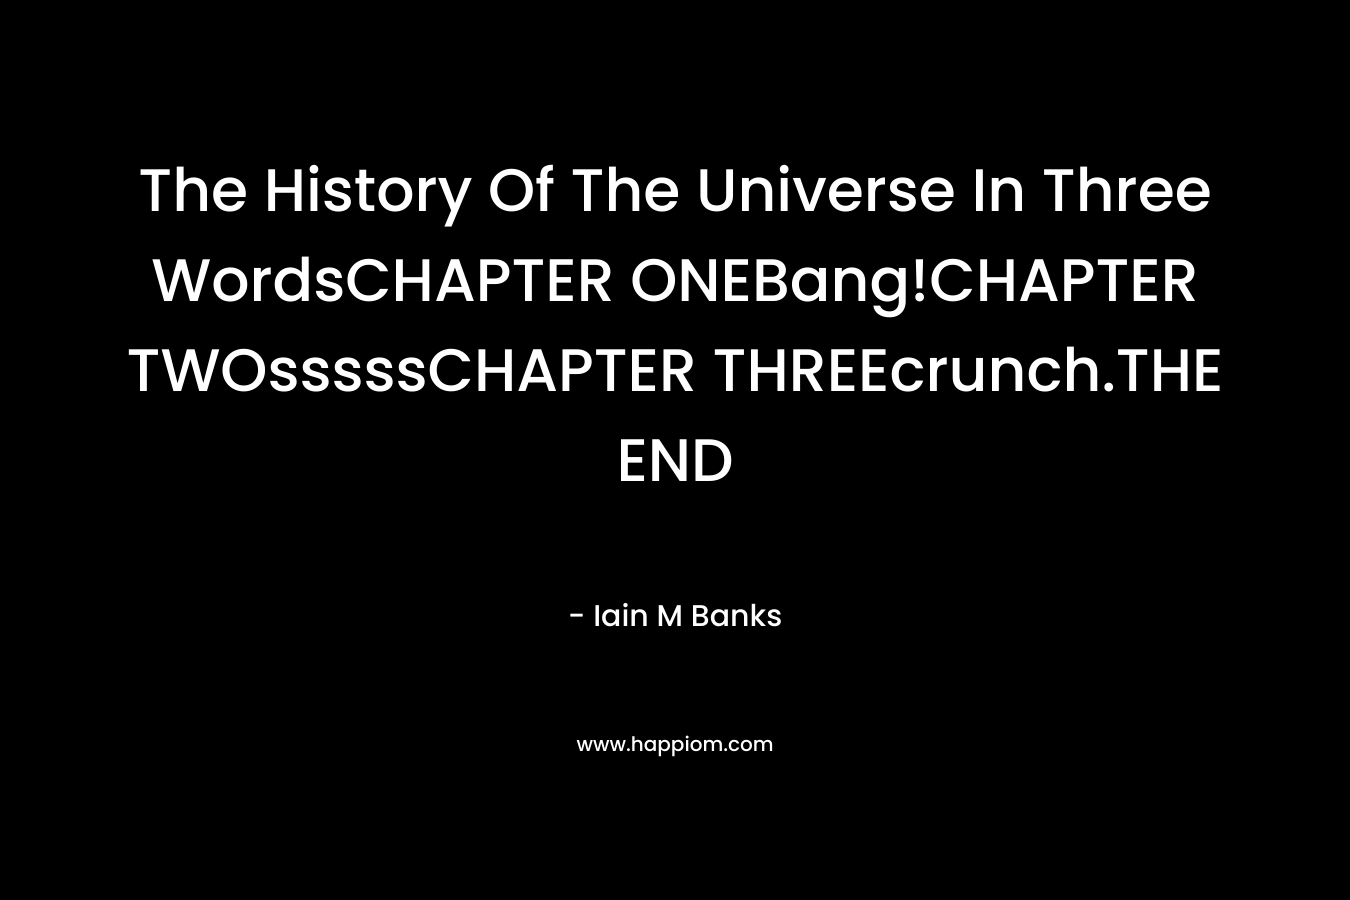 The History Of The Universe In Three WordsCHAPTER ONEBang!CHAPTER TWOsssssCHAPTER THREEcrunch.THE END